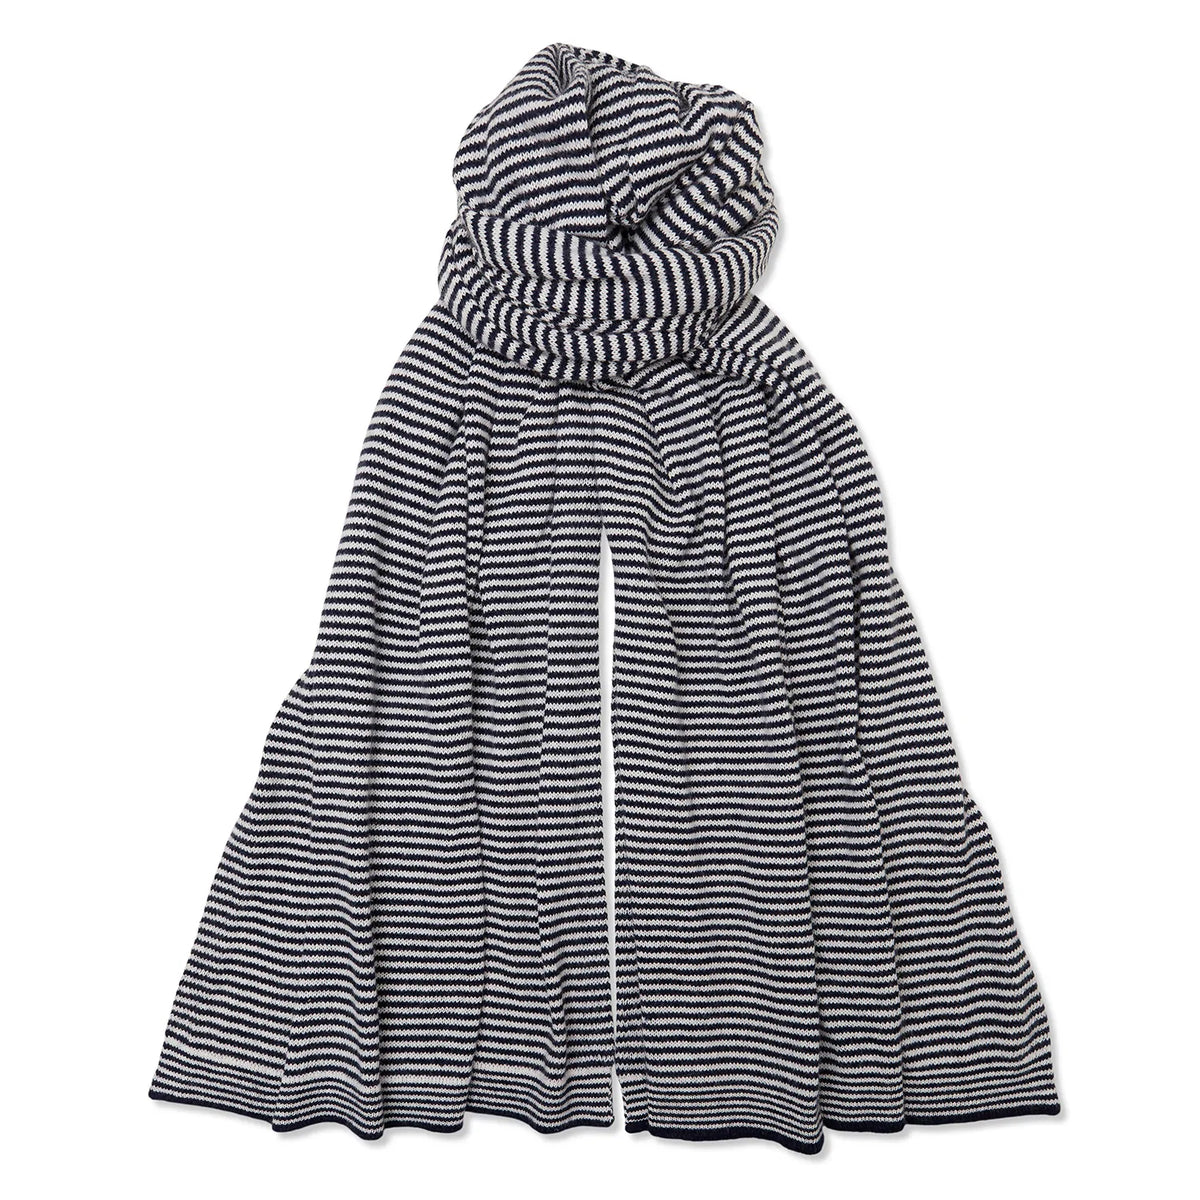 Long rectangular breton striped cashmere scarf in navy and white